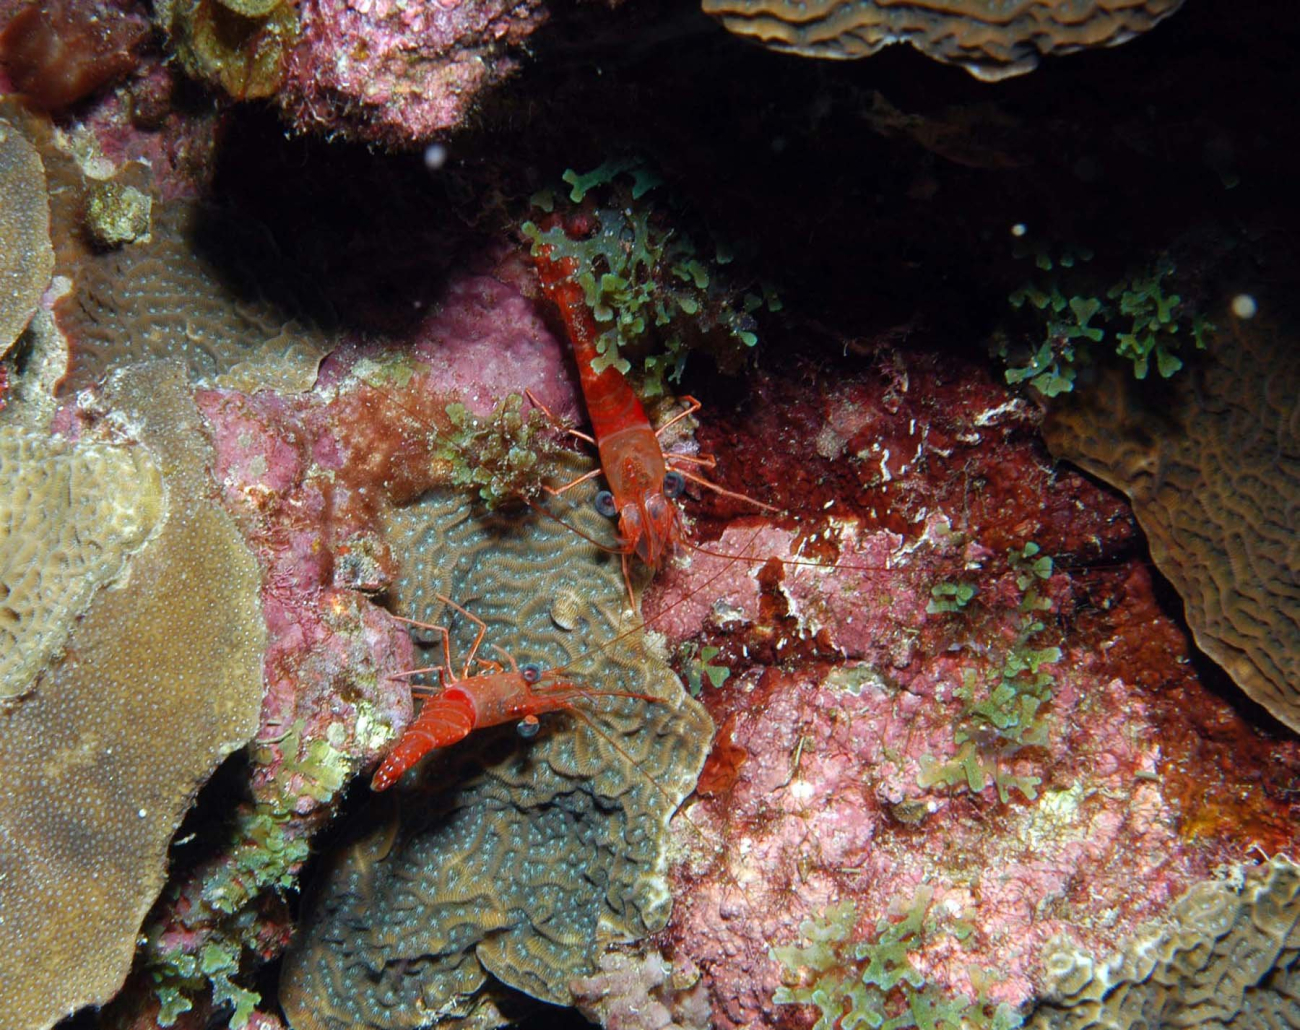 Two large red shrimp on a coral bottom